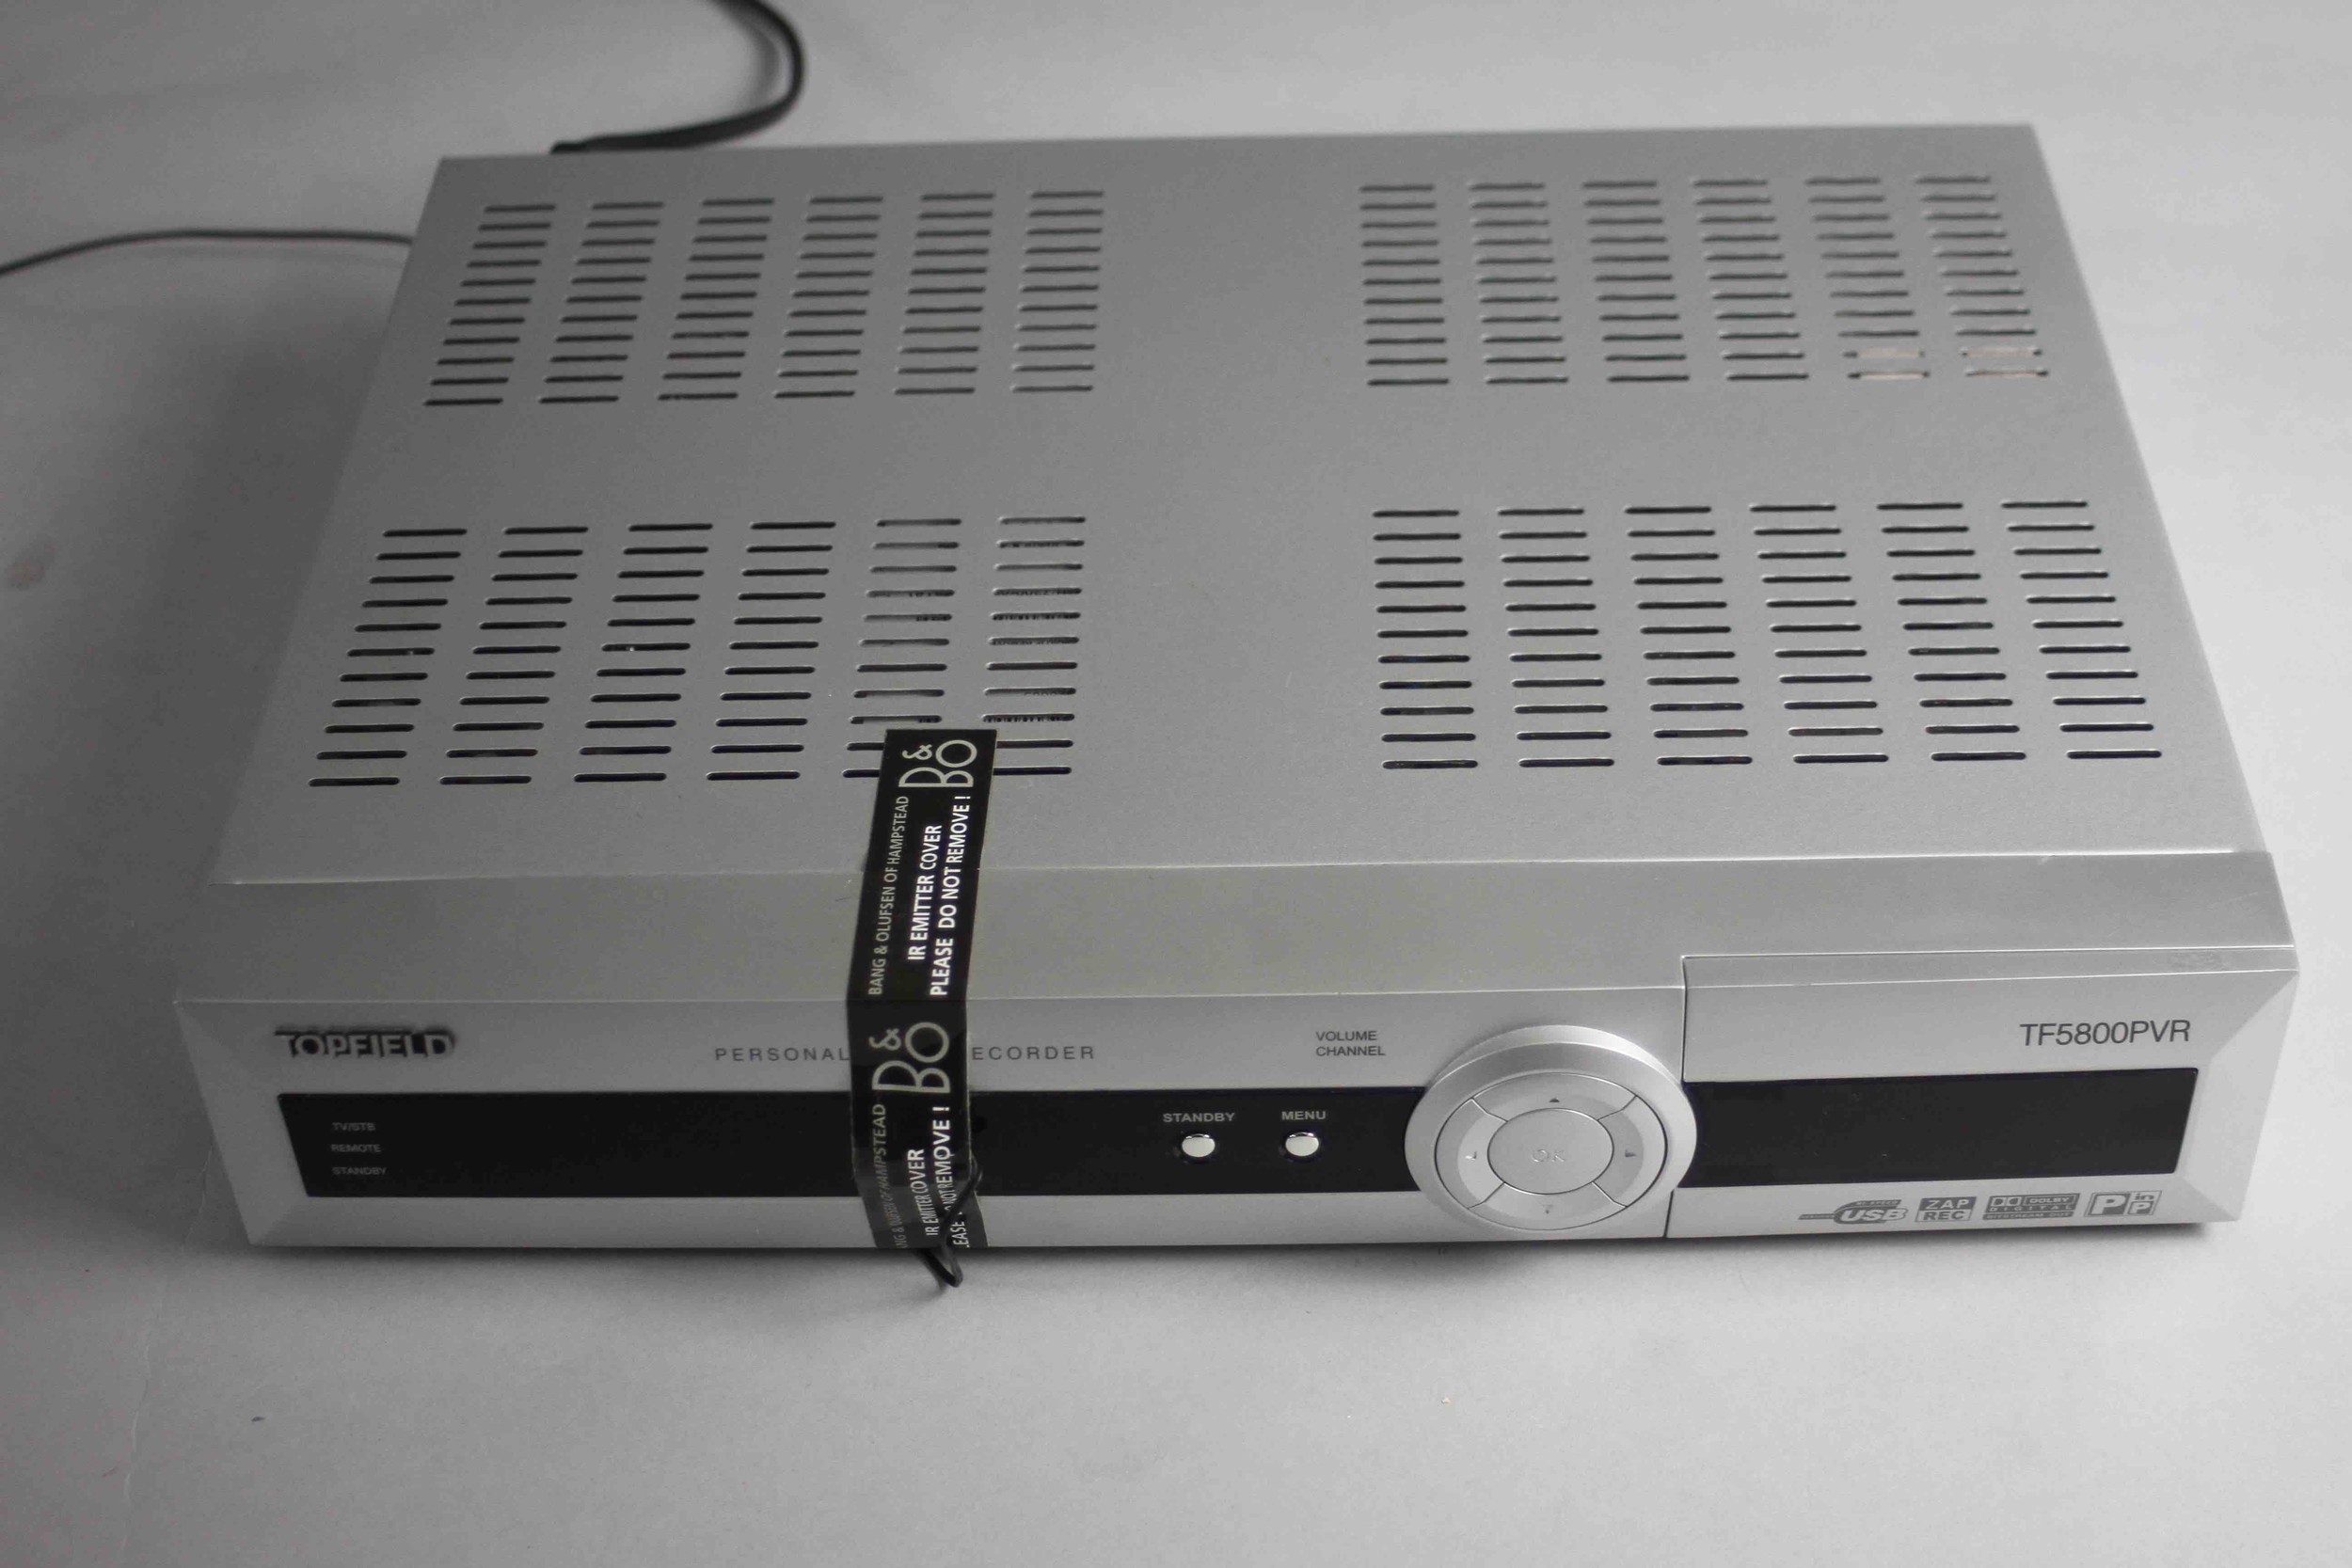 A Topfield TF-5800 Digital Video Recorder in silver. - Image 2 of 3